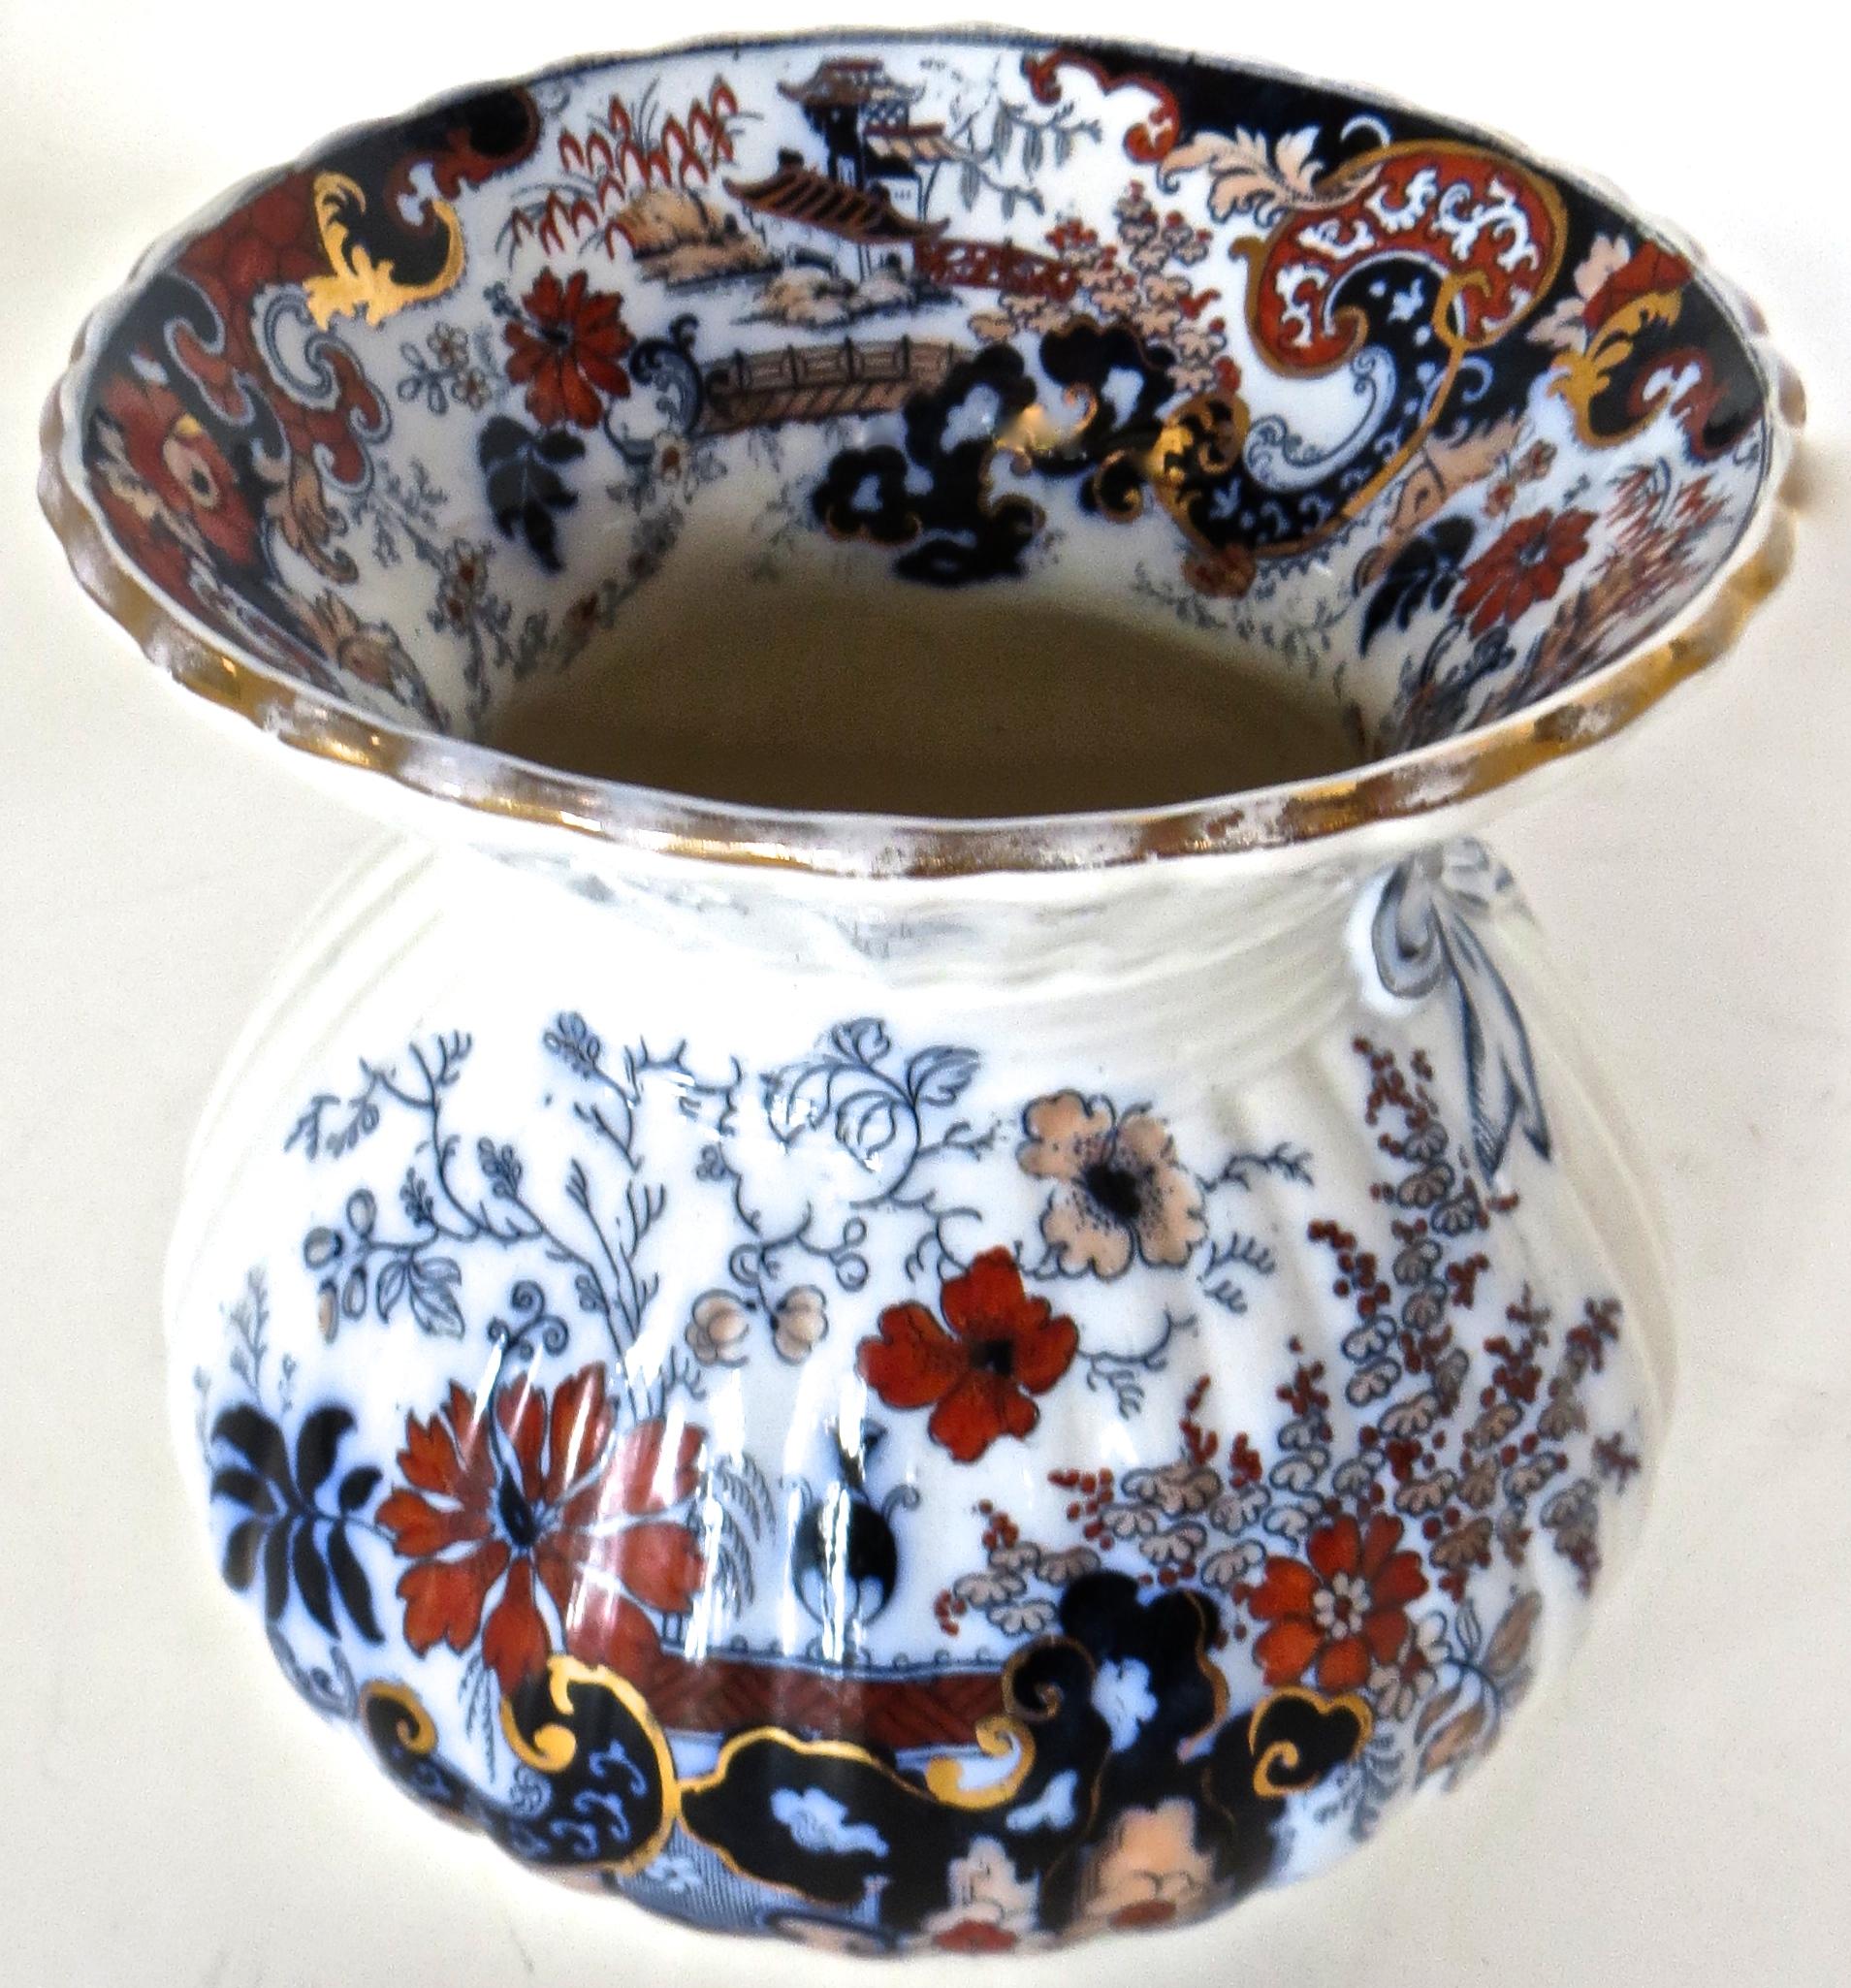 The mark on the underneath (see image) indicates that this spittoon is of Japanese Imari porcelain, manufactured circa 1880, and made specifically for the American market for the preponderance of bars and saloons at that time.
These were popular